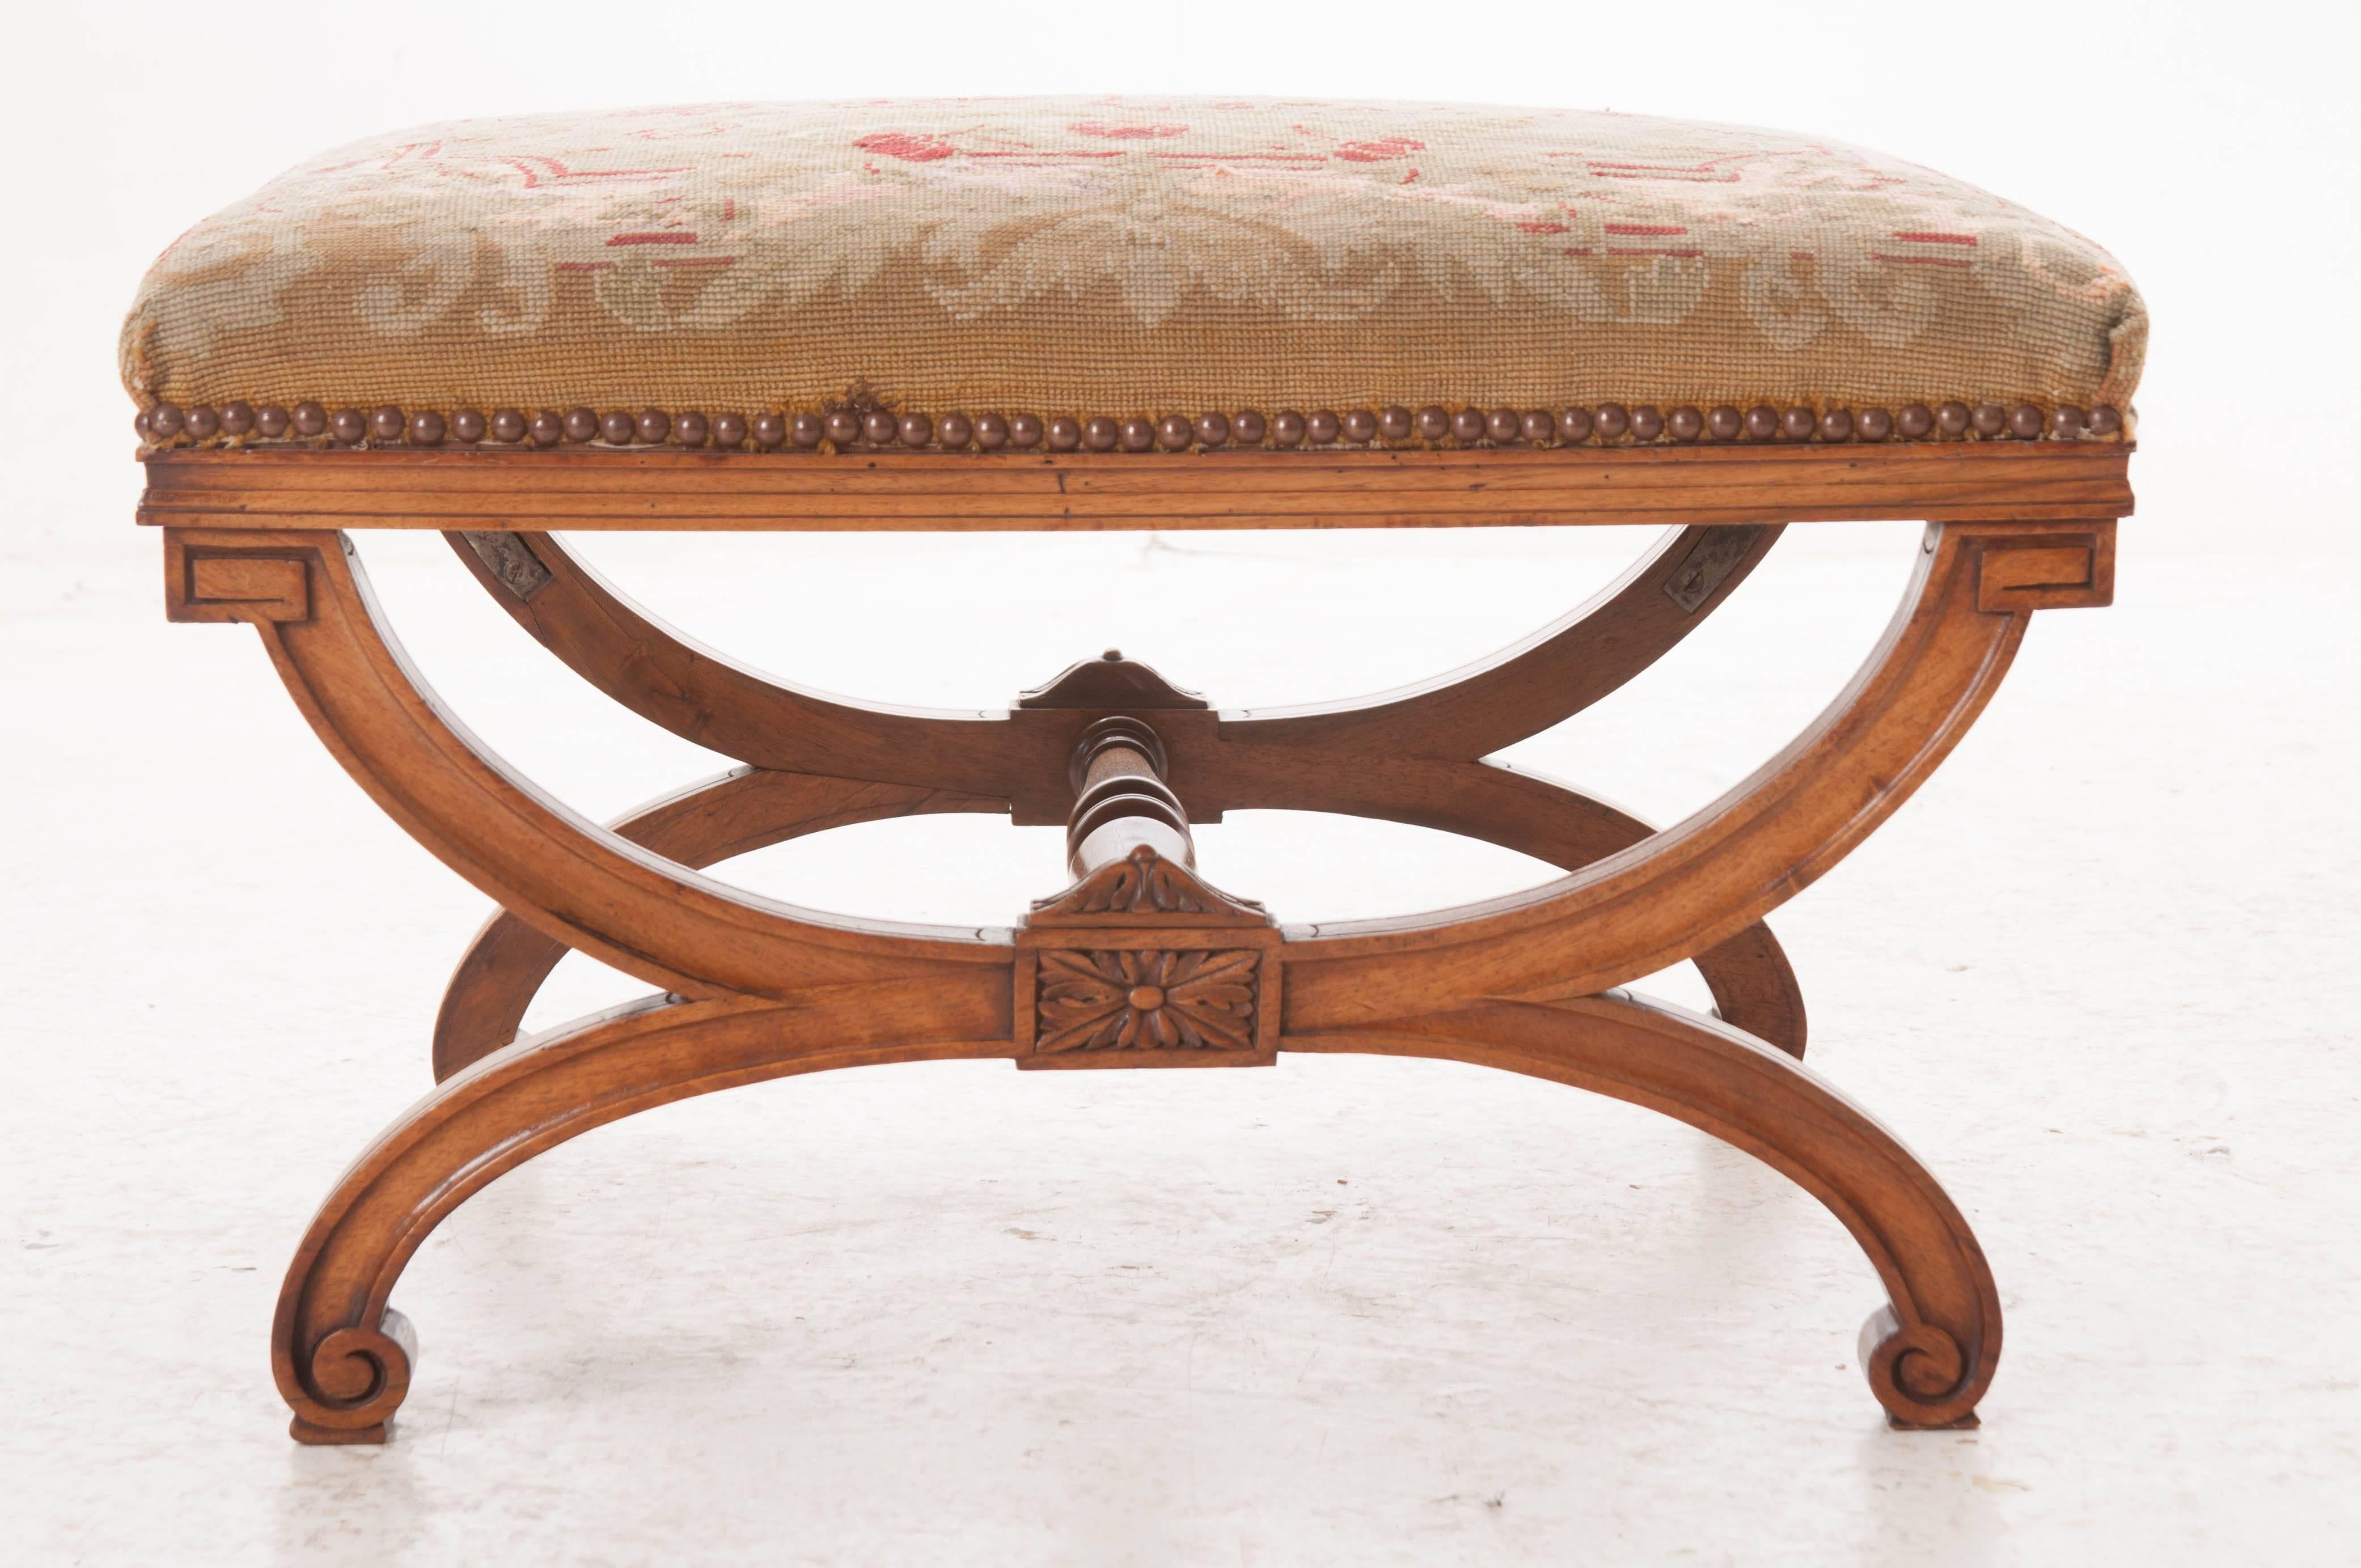 A sensational 19th century French carved walnut stool with a gorgeous needlepoint tapestry seat. Incorporating elements of Louis XVI, the shaped X-frame base is solid and stabile. The base is reinforced with an expertly turned walnut stretcher. The